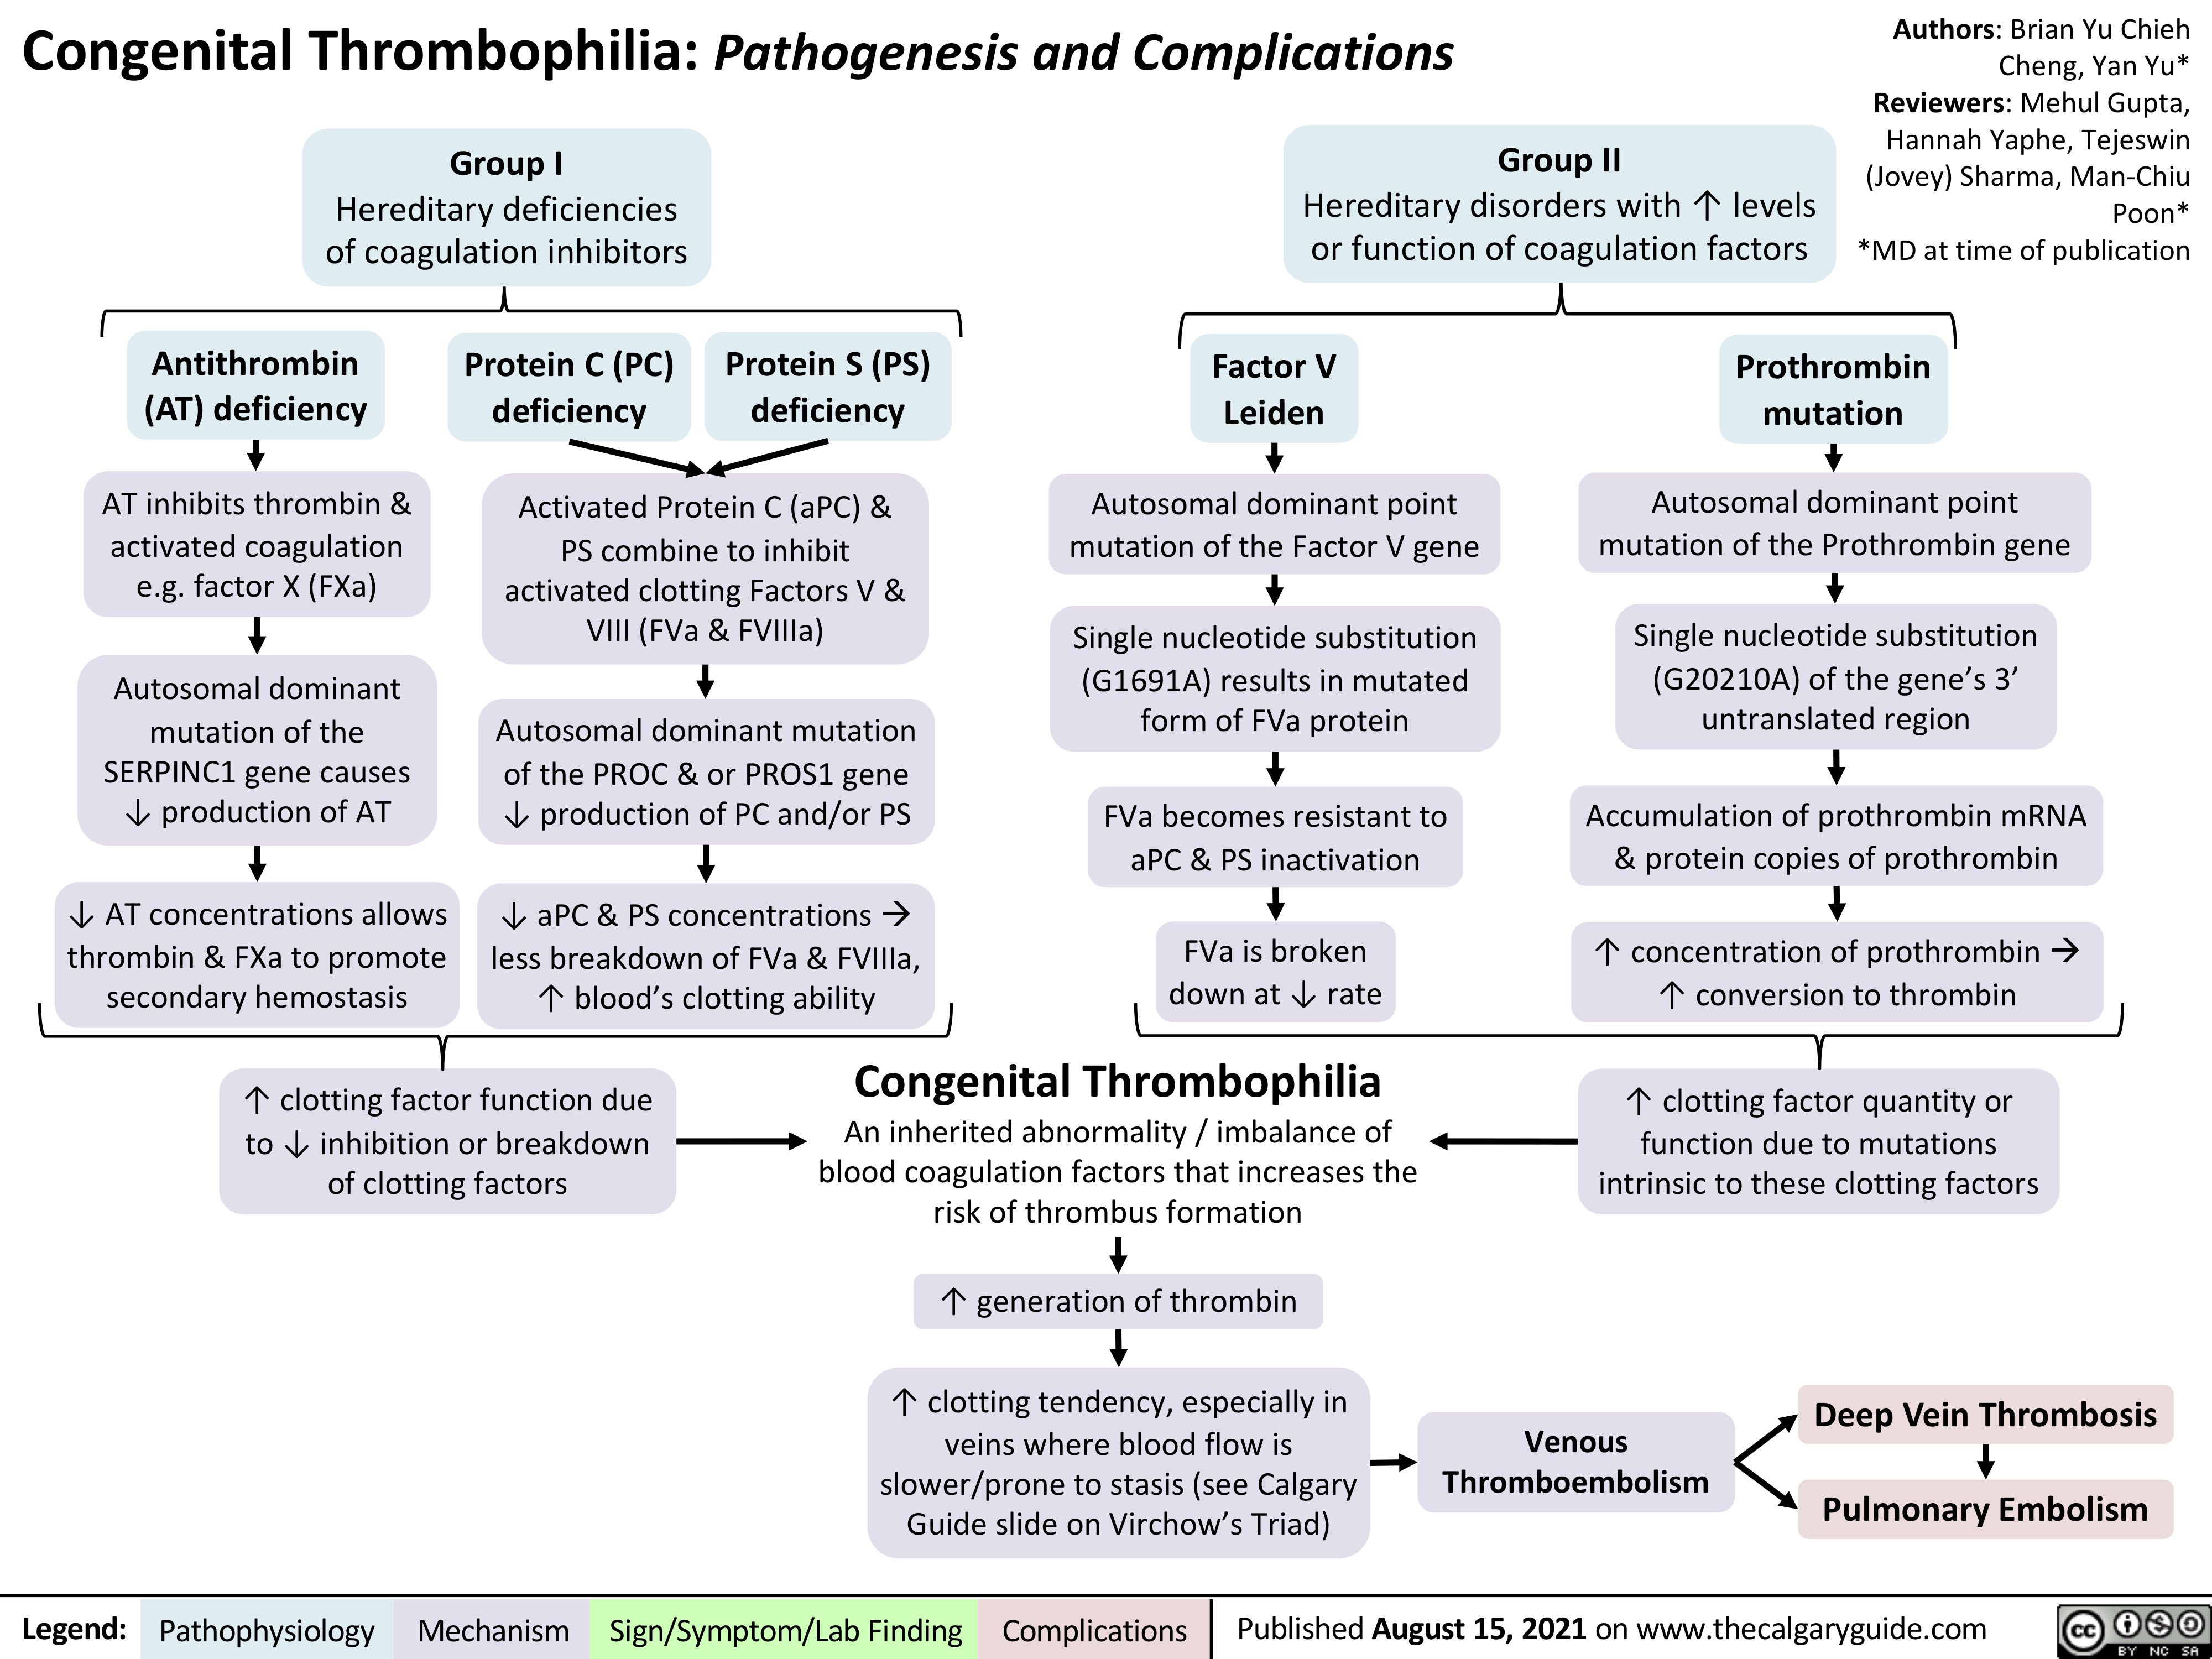 Congenital Thrombophilia: Pathogenesis and Complications
Authors: Brian Yu Chieh Cheng, Yan Yu* Reviewers: Mehul Gupta, Hannah Yaphe, Tejeswin (Jovey) Sharma, Man-Chiu Poon* *MD at time of publication
  Group I
Hereditary deficiencies of coagulation inhibitors
Group II
Hereditary disorders with ↑ levels or function of coagulation factors
       Antithrombin (AT) deficiency
AT inhibits thrombin & activated coagulation e.g. factor X (FXa)
Autosomal dominant mutation of the
SERPINC1 gene causes ↓ production of AT
↓ AT concentrations allows thrombin & FXa to promote secondary hemostasis
Protein C (PC) deficiency
Protein S (PS) deficiency
Factor V Leiden
Autosomal dominant point mutation of the Factor V gene
Single nucleotide substitution (G1691A) results in mutated form of FVa protein
FVa becomes resistant to aPC & PS inactivation
FVa is broken down at ↓ rate
Prothrombin mutation
Autosomal dominant point mutation of the Prothrombin gene
Single nucleotide substitution (G20210A) of the gene’s 3’ untranslated region
Accumulation of prothrombin mRNA & protein copies of prothrombin
↑ concentration of prothrombinà ↑ conversion to thrombin
↑ clotting factor quantity or function due to mutations intrinsic to these clotting factors
         Activated Protein C (aPC) & PS combine to inhibit
activated clotting Factors V & VIII (FVa & FVIIIa)
Autosomal dominant mutation of the PROC & or PROS1 gene ↓ production of PC and/or PS
↓ aPC & PS concentrationsà less breakdown of FVa & FVIIIa, ↑ blood’s clotting ability
                        ↑ clotting factor function due to ↓ inhibition or breakdown of clotting factors
Congenital Thrombophilia
An inherited abnormality / imbalance of blood coagulation factors that increases the risk of thrombus formation
↑ generation of thrombin
↑ clotting tendency, especially in veins where blood flow is slower/prone to stasis (see Calgary Guide slide on Virchow’s Triad)
         Venous Thromboembolism
Deep Vein Thrombosis Pulmonary Embolism
    Legend:
 Pathophysiology
Mechanism
Sign/Symptom/Lab Finding
  Complications
 Published August 15, 2021 on www.thecalgaryguide.com
   